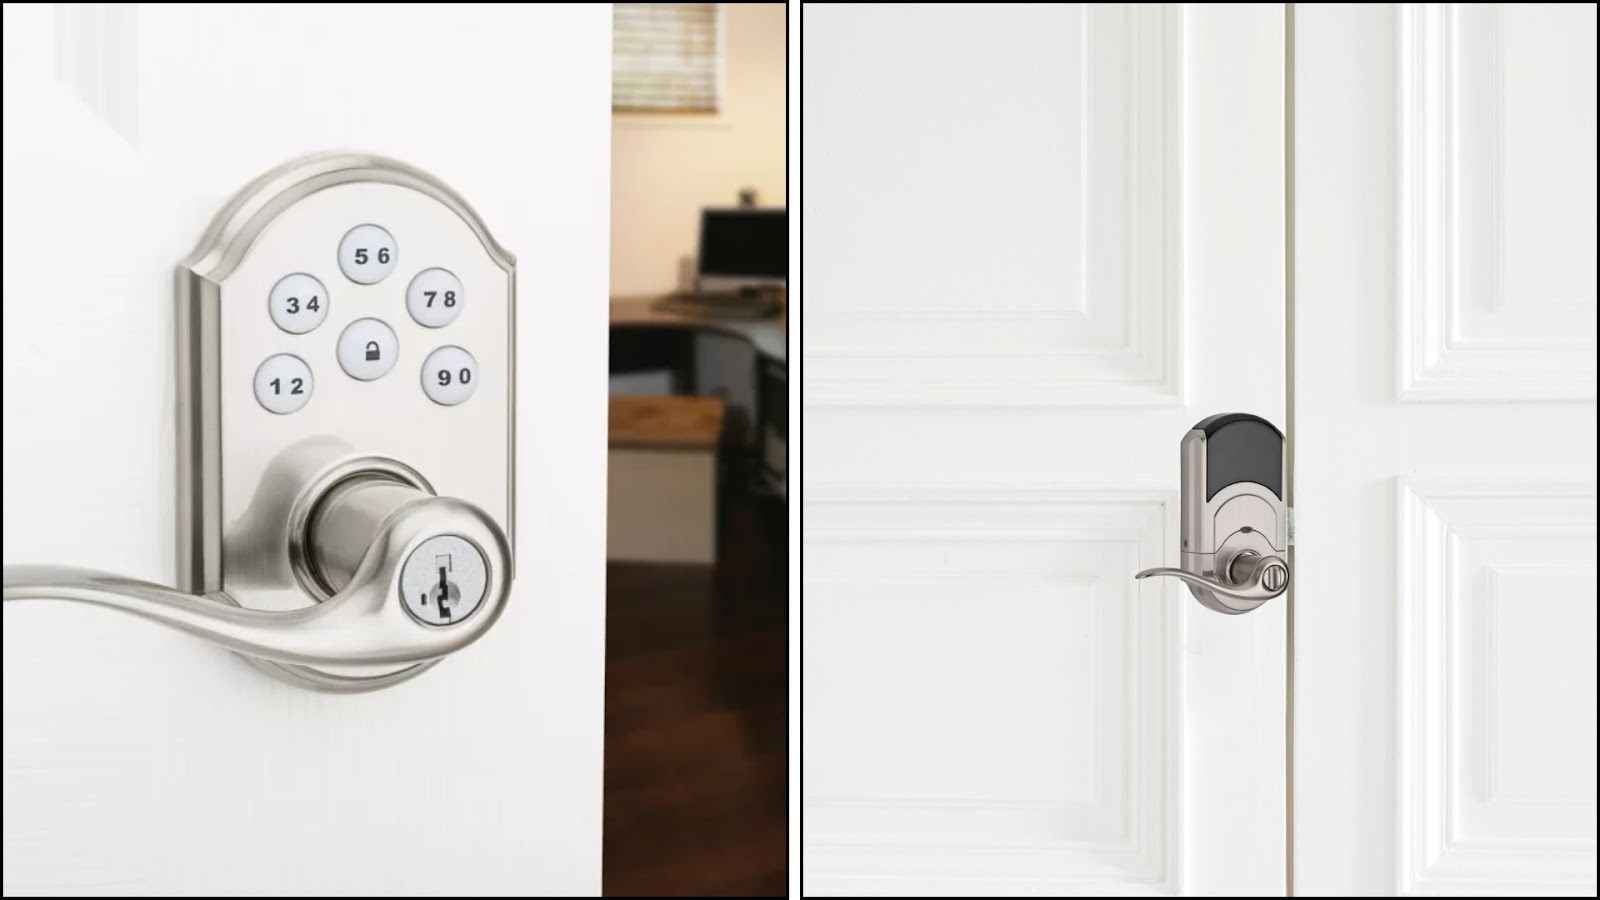 An electronic keyed lever lock with smart keypad security for home safety